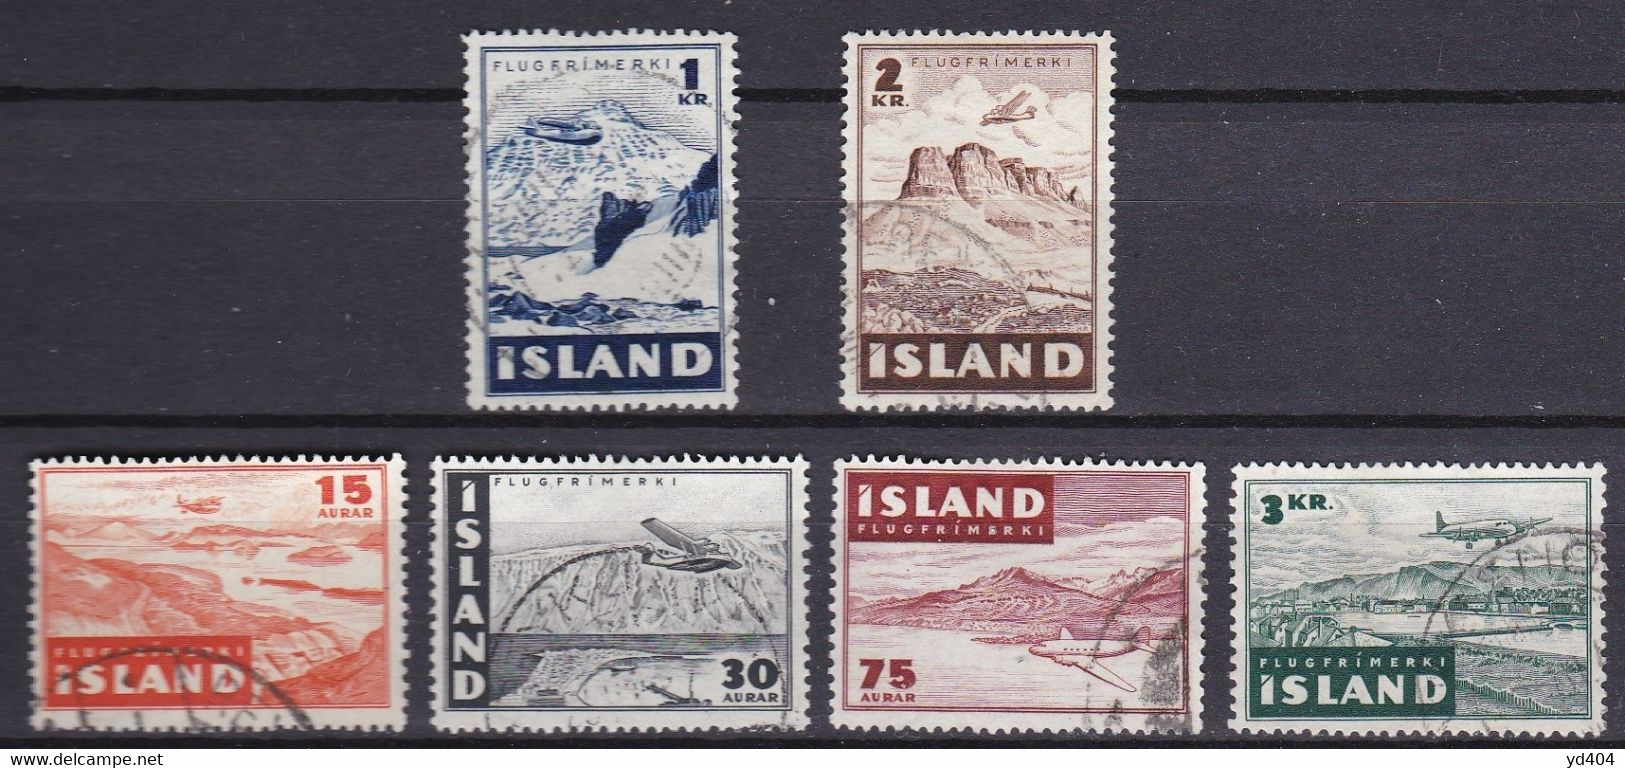 IS330 – ISLANDE – ICELAND – 1947 – PLANE OVER GLACIERS – Y&T # 21/6 USED 10 € - Luftpost